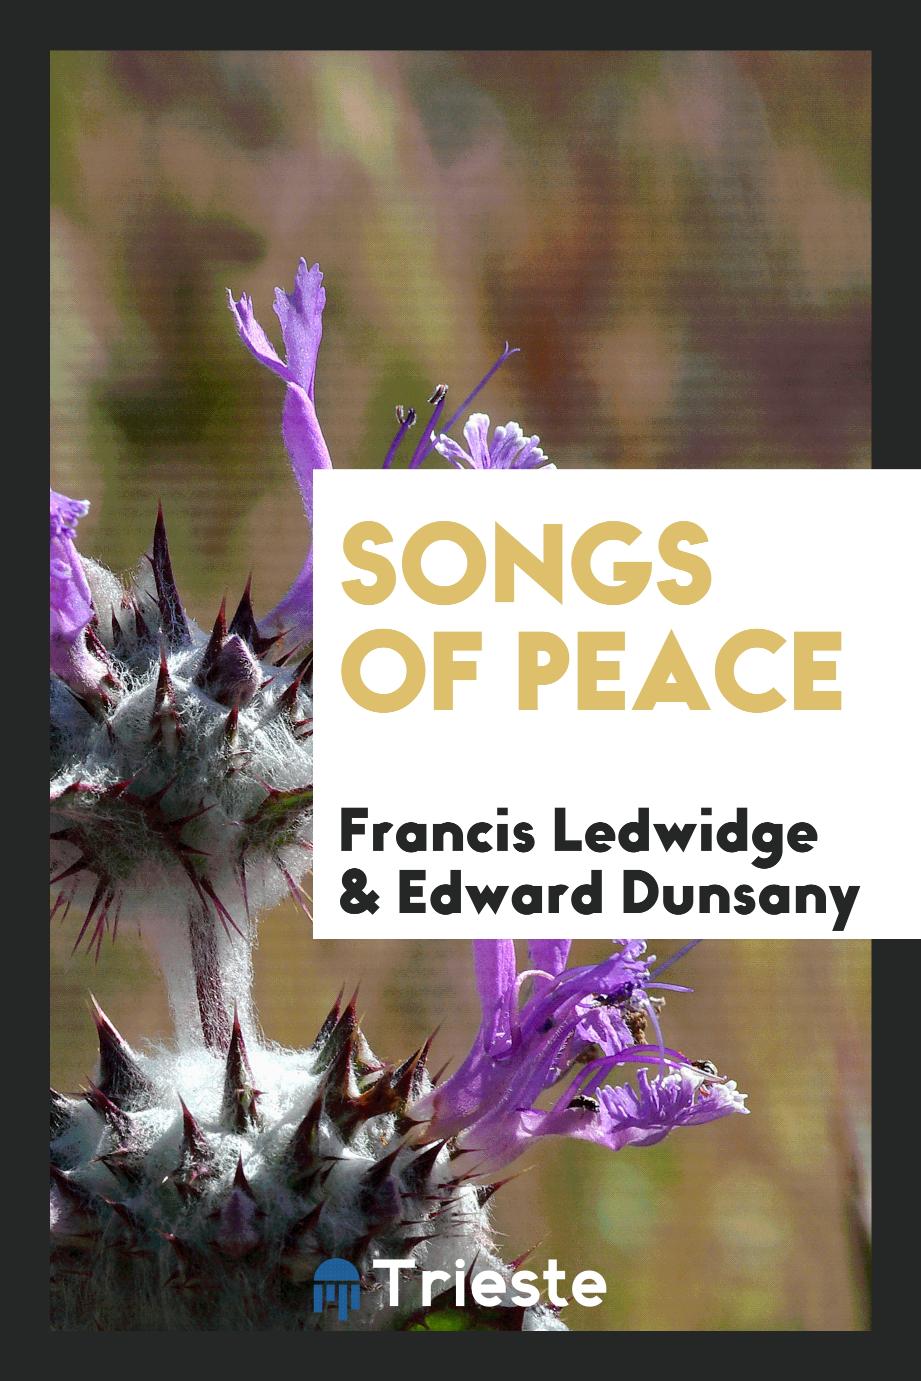 Songs of peace